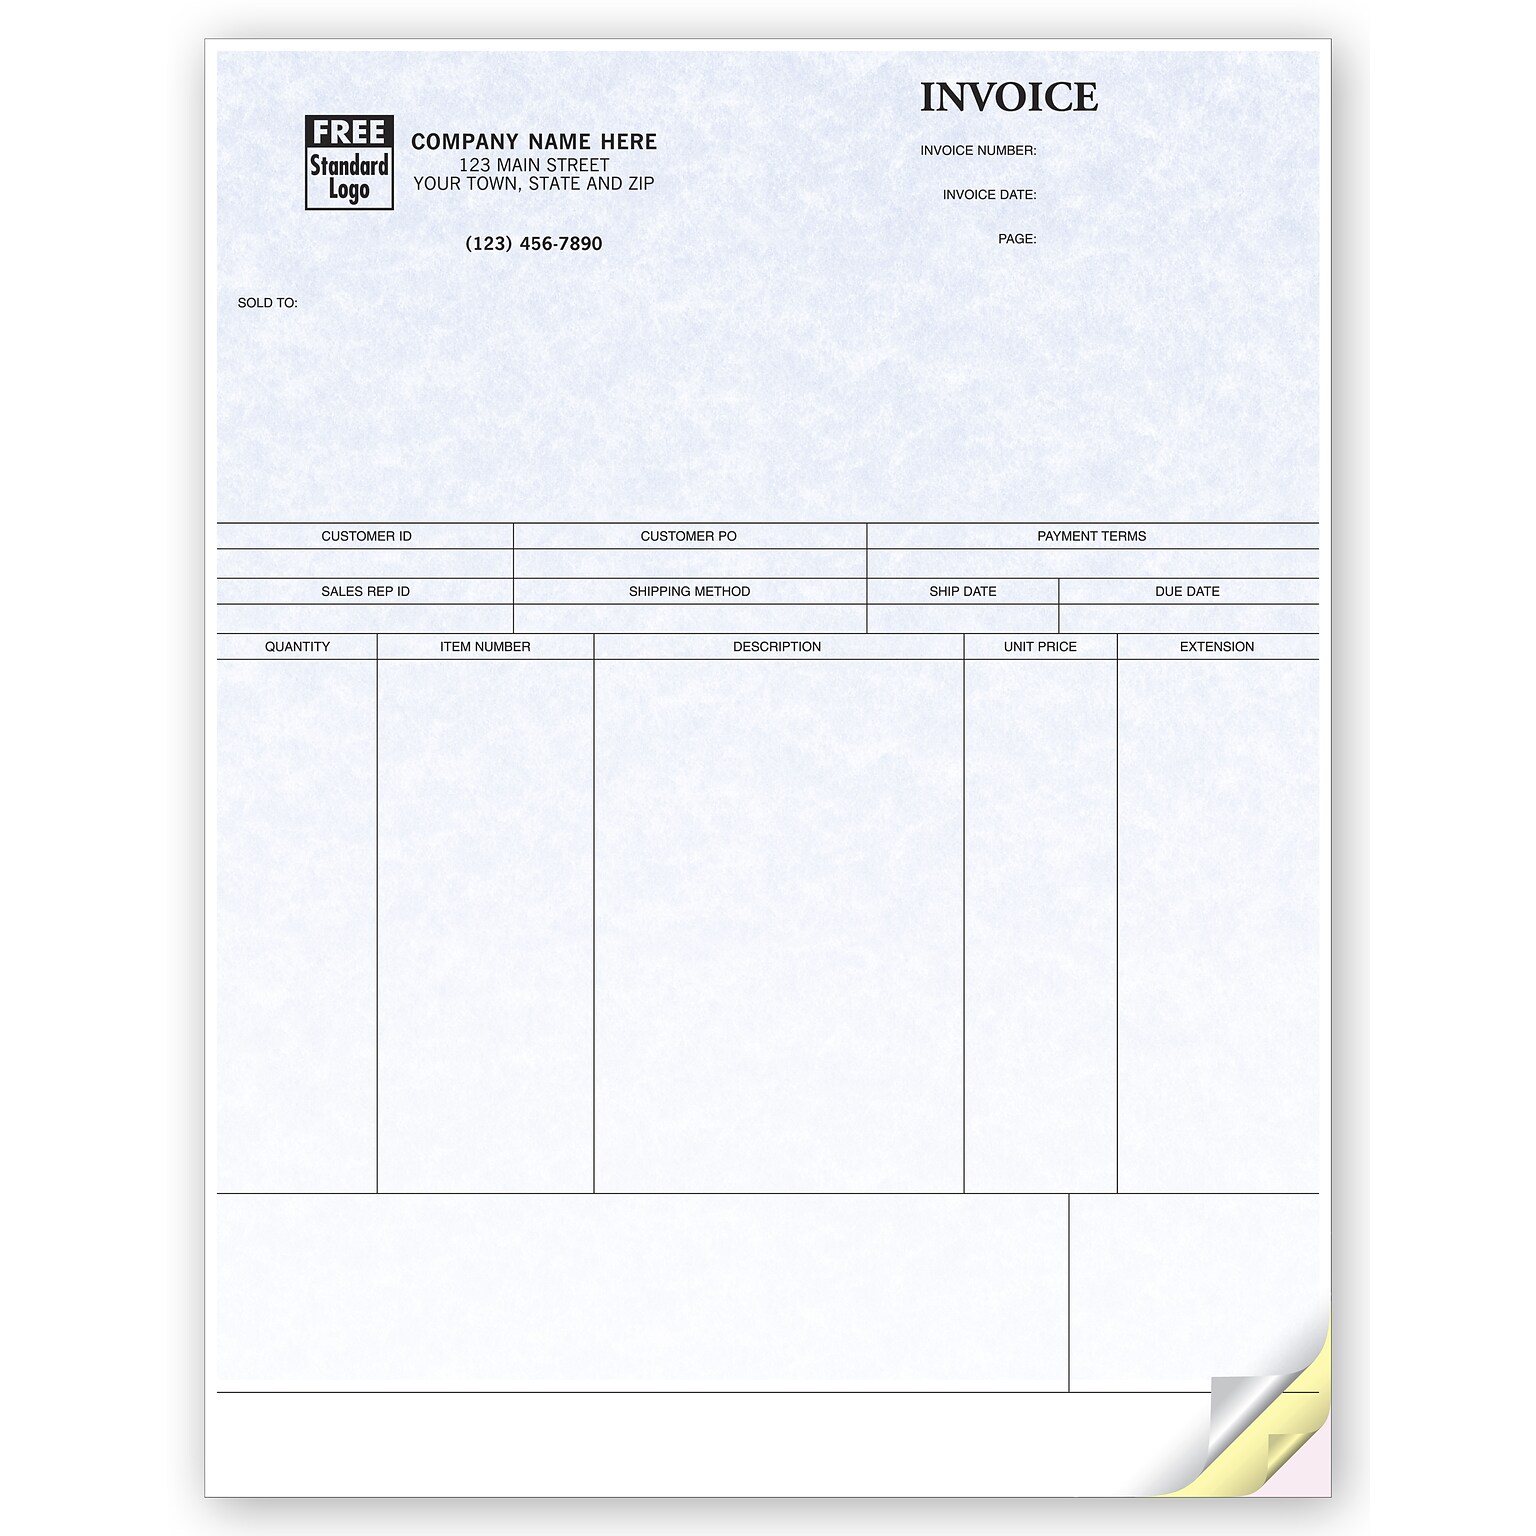 Custom Product Invoices, Laser, 1 Parts, 1 Color Printing, 8 1/2 x 11, 500/Pack